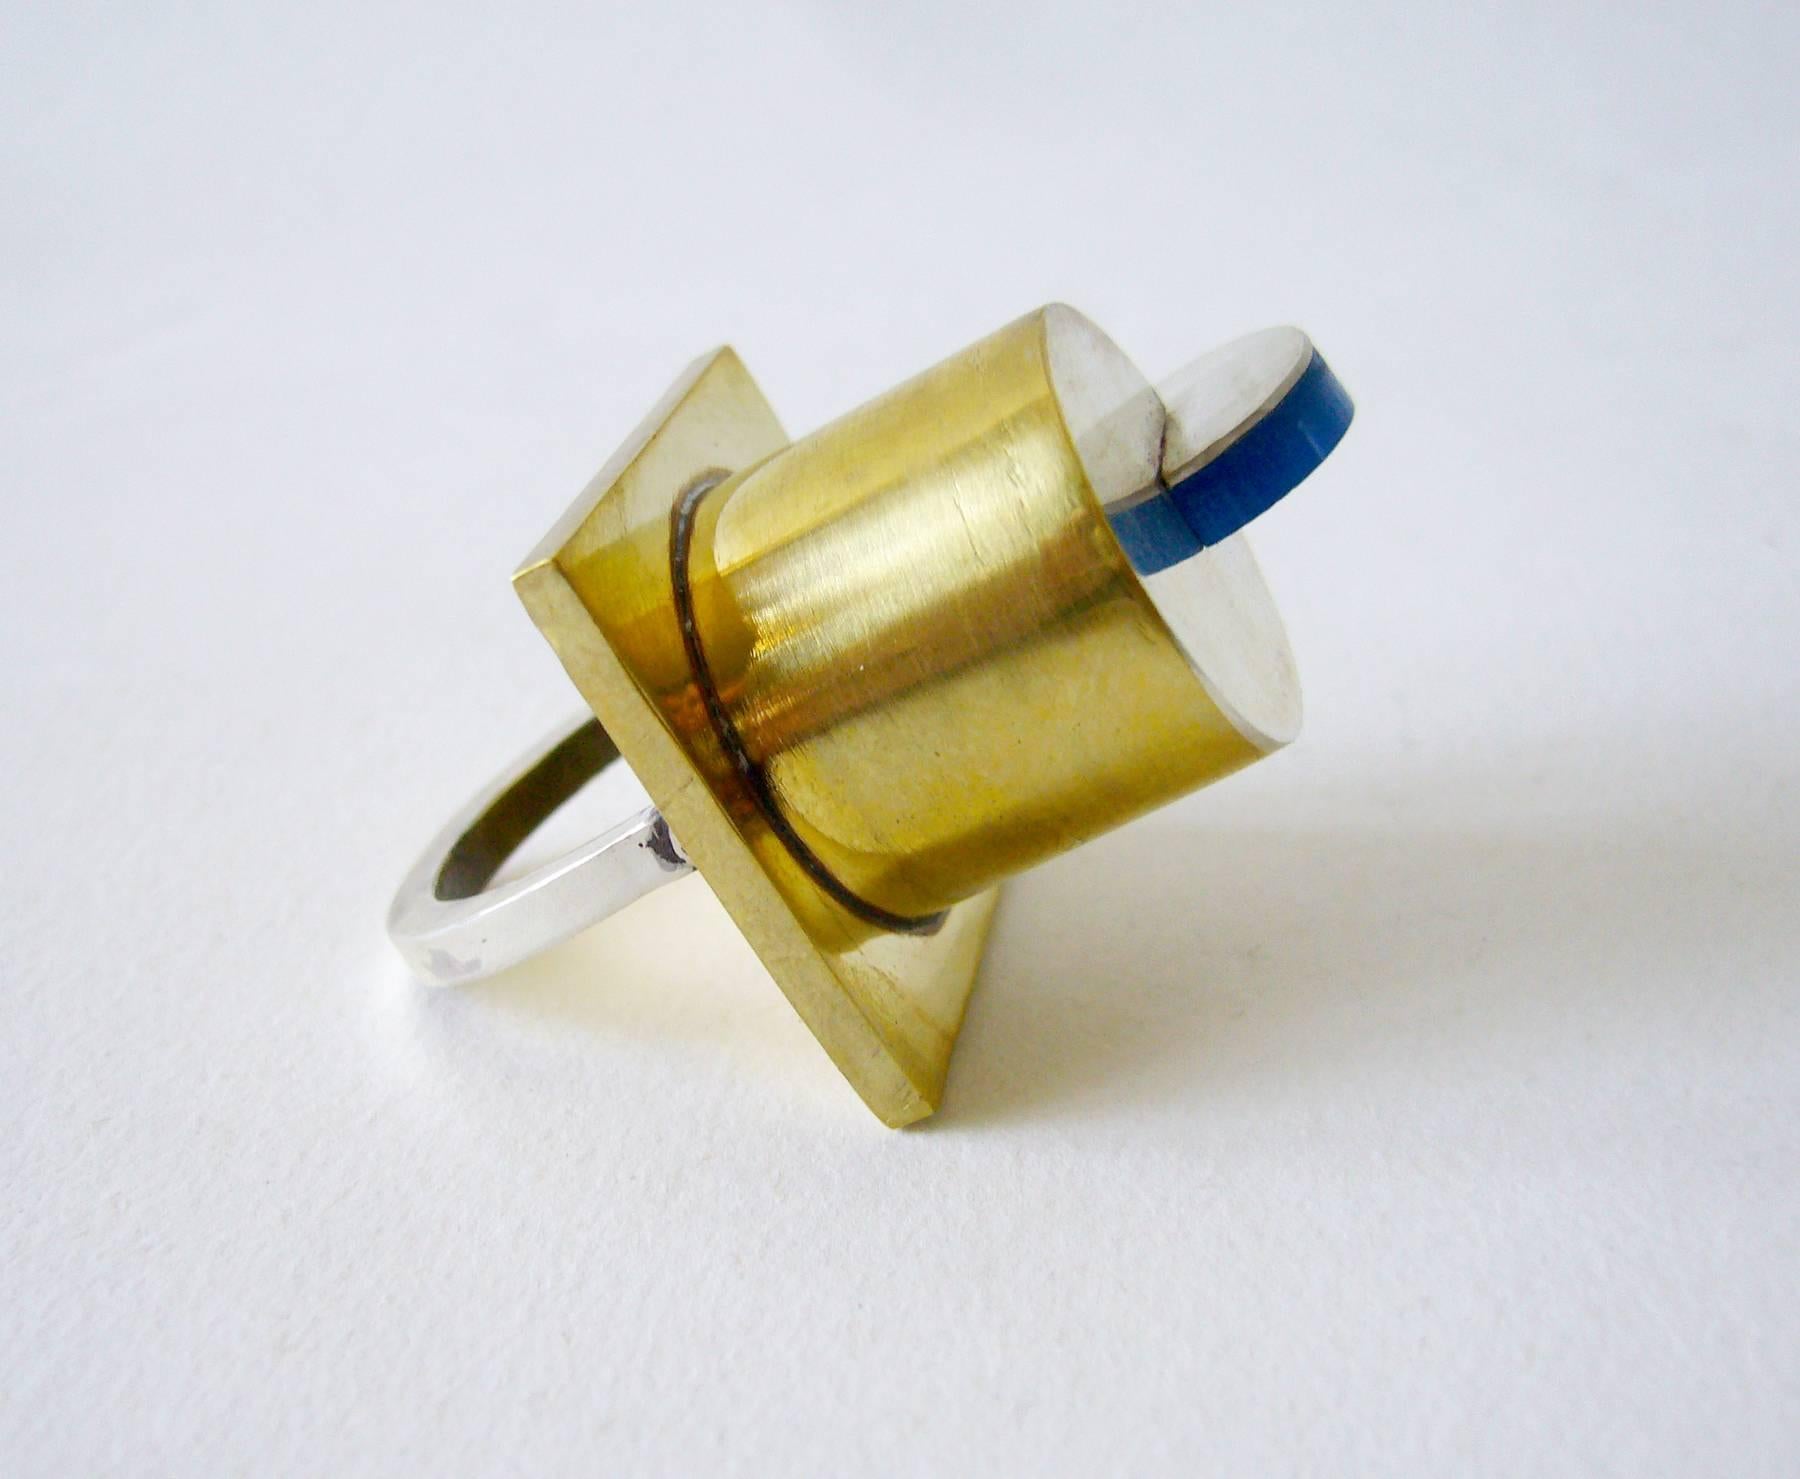 Post Modernist style ring of sterling silver, brass and acrylic designed and created by Heidi Abrahamson.  Ring measures a finger size 7 but can fit up to a 7.25 due to its design.  It sits 1